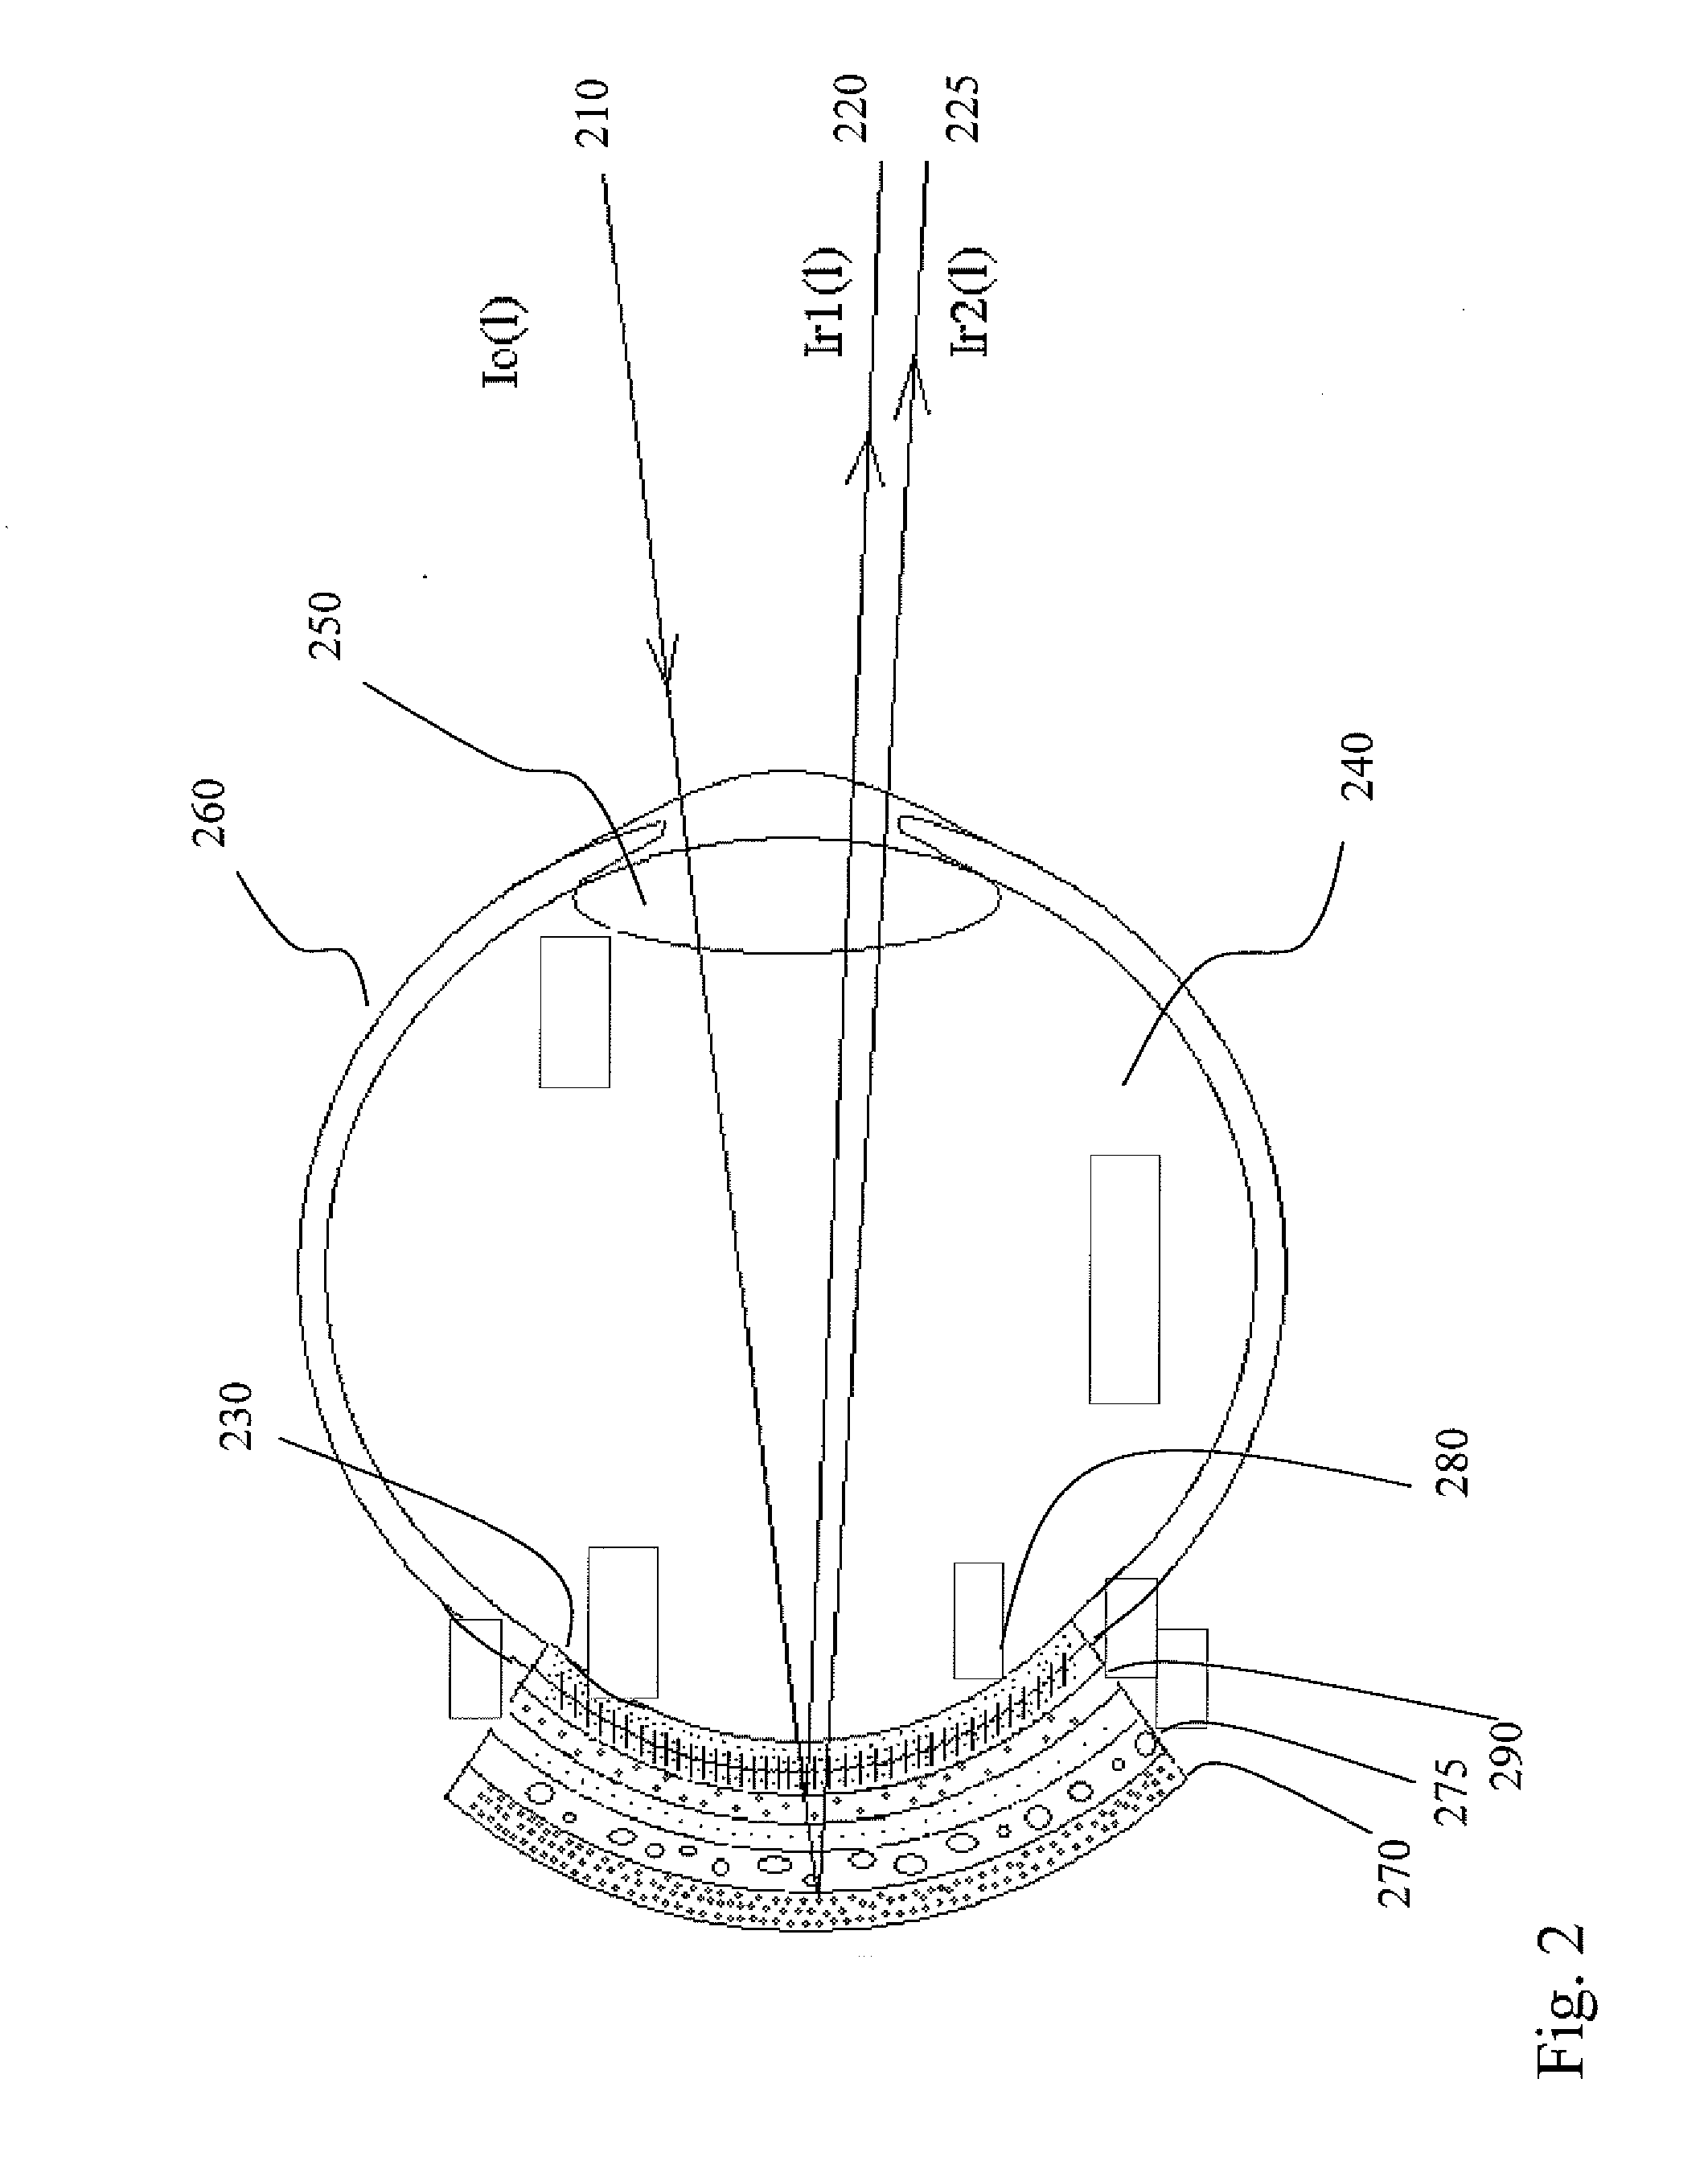 Method and Apparatus for Correlated Ophthalmic Measurements